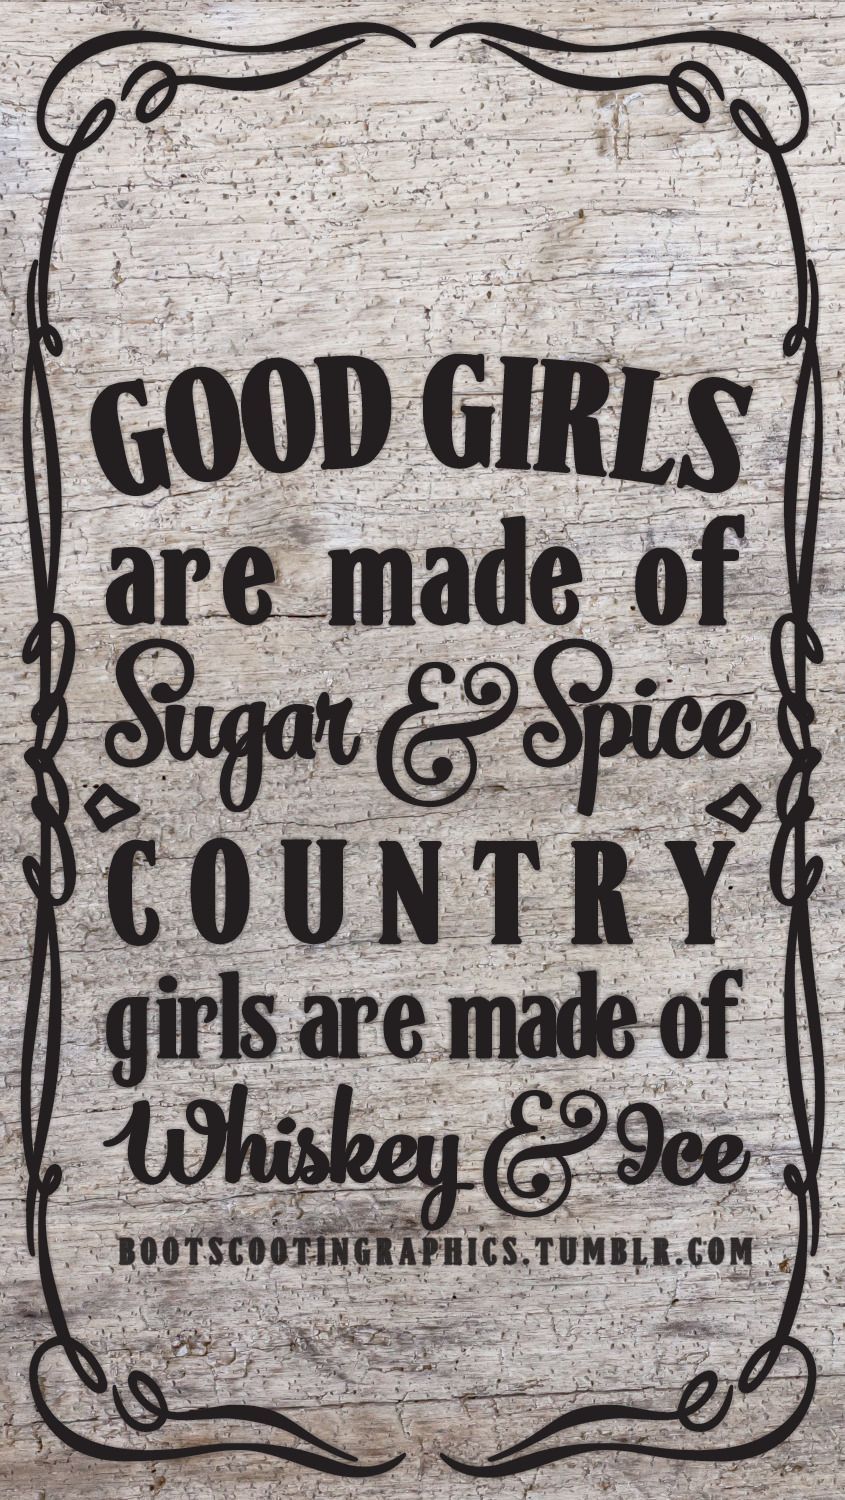 Country girl quotes .com